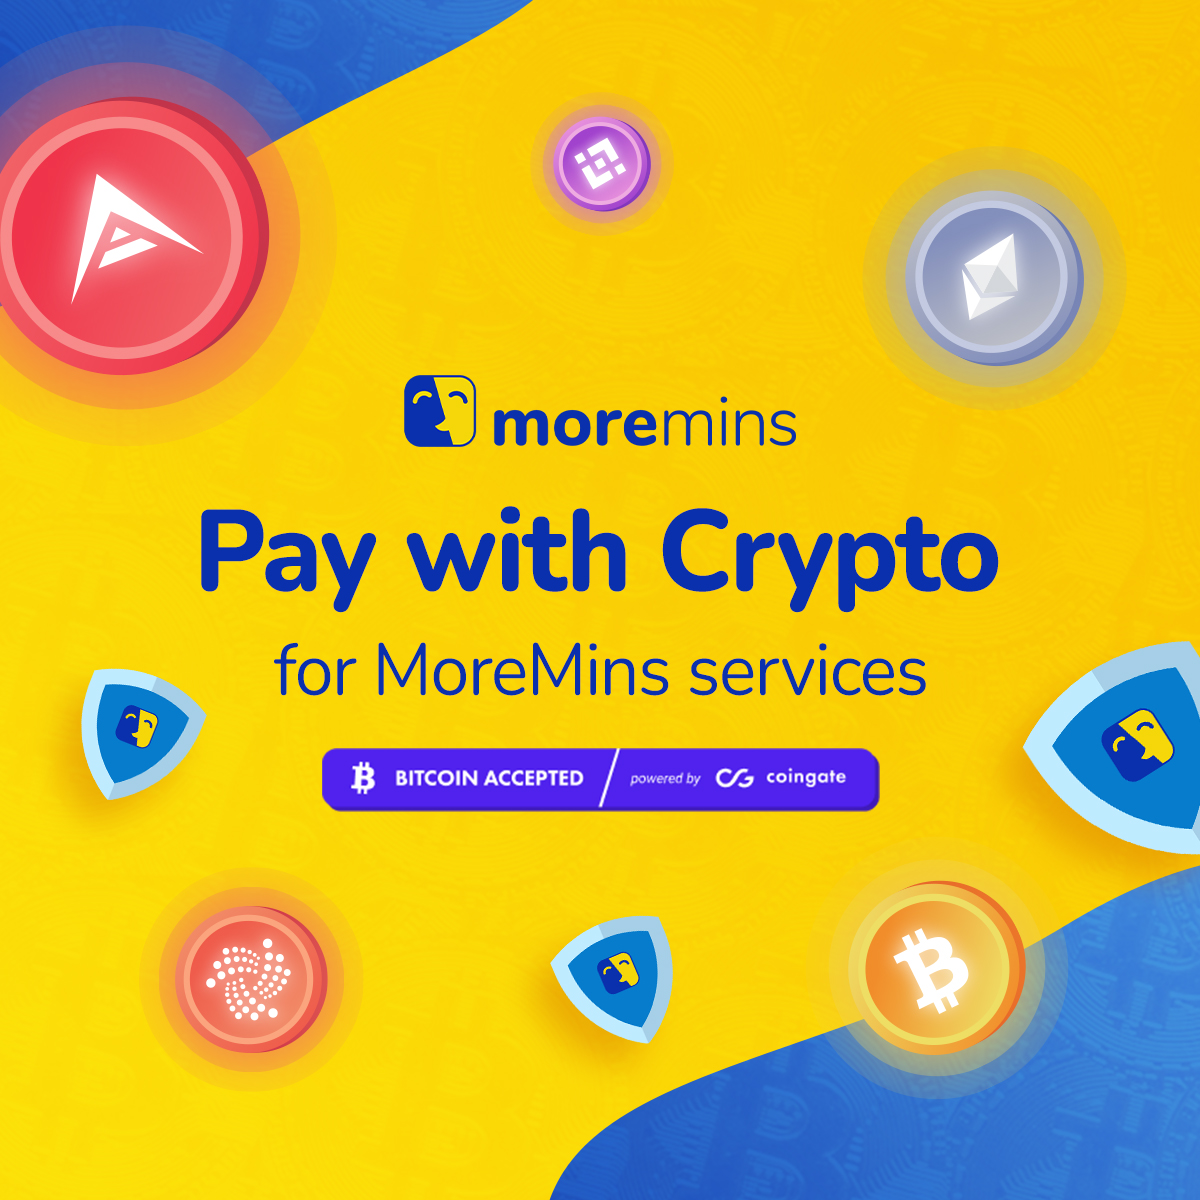 Pay with Crypto for MoreMins services